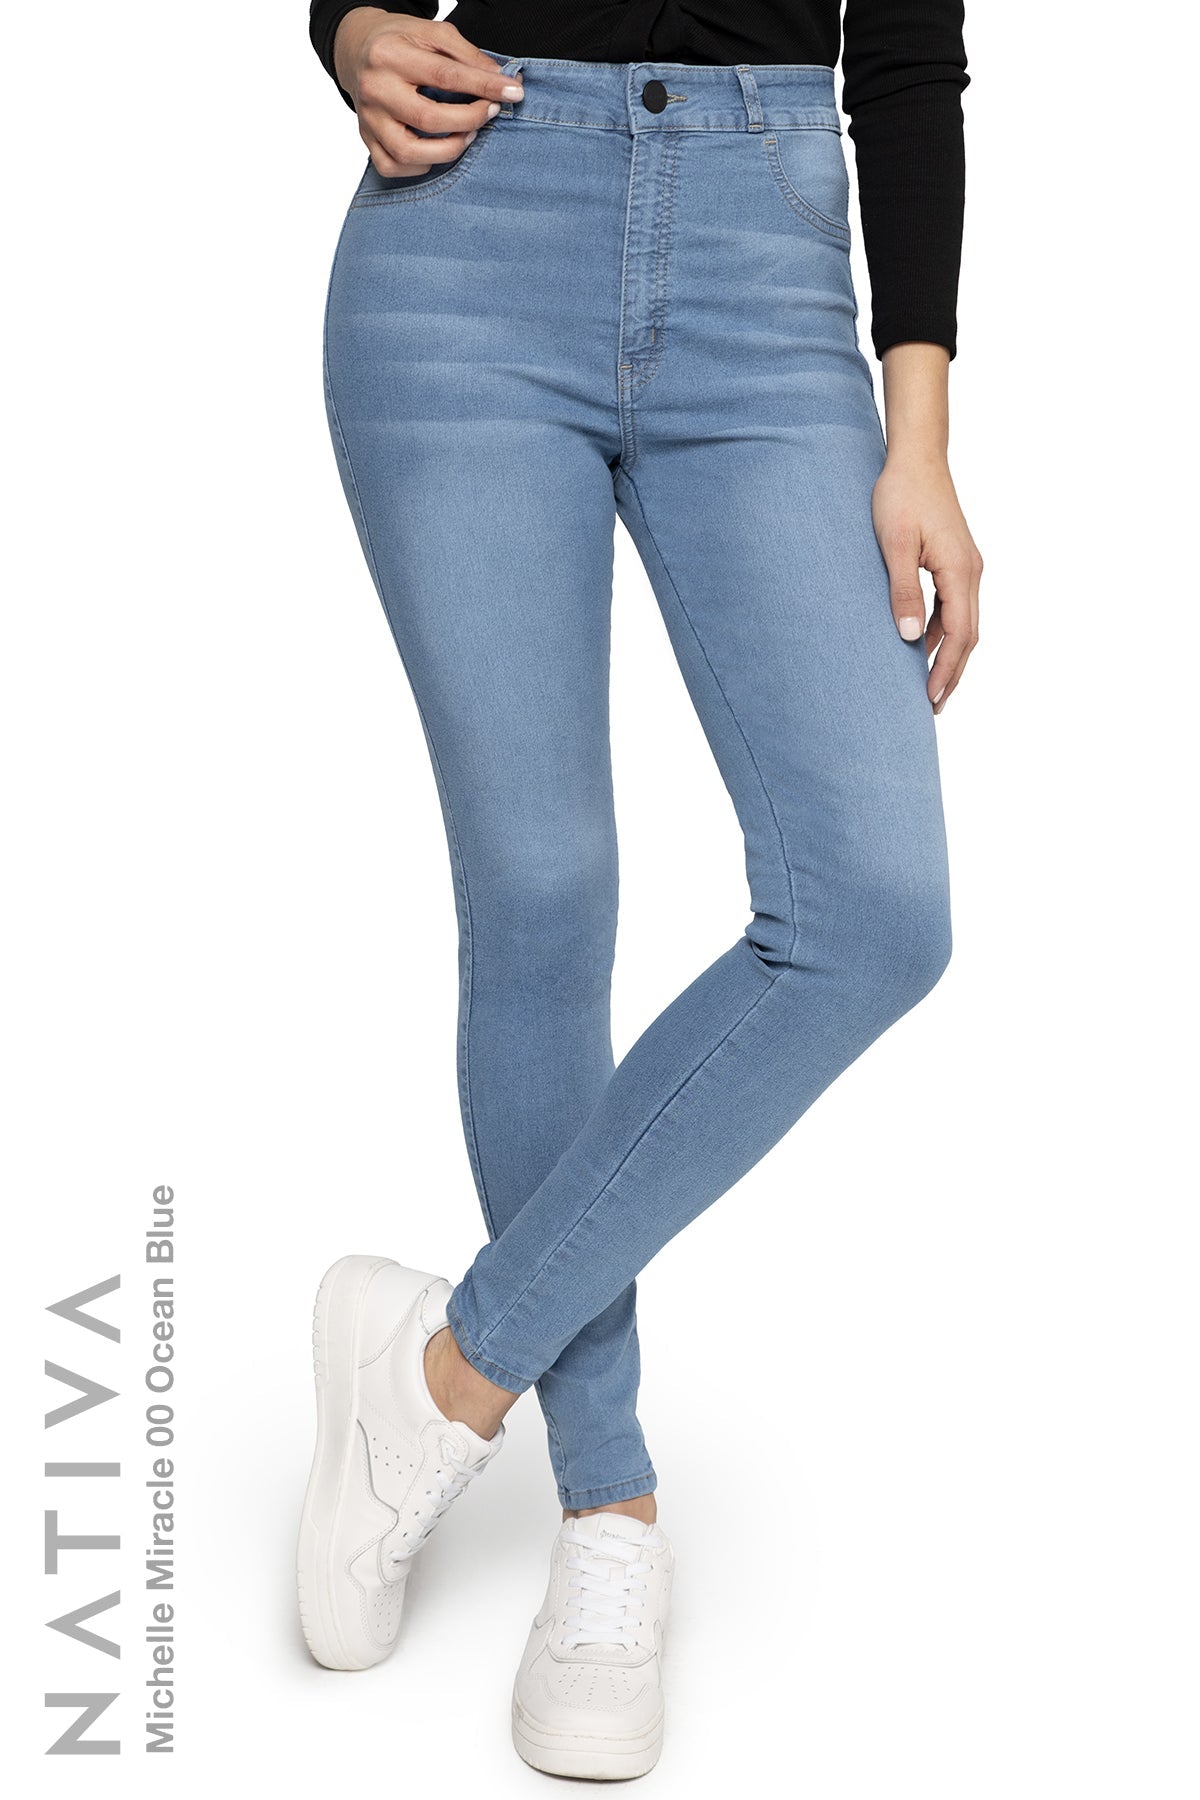 MICHELLE NATIVA, STRETCH 00 High OCEAN Shaping Ca MIRACLE BLUE, JEANS.